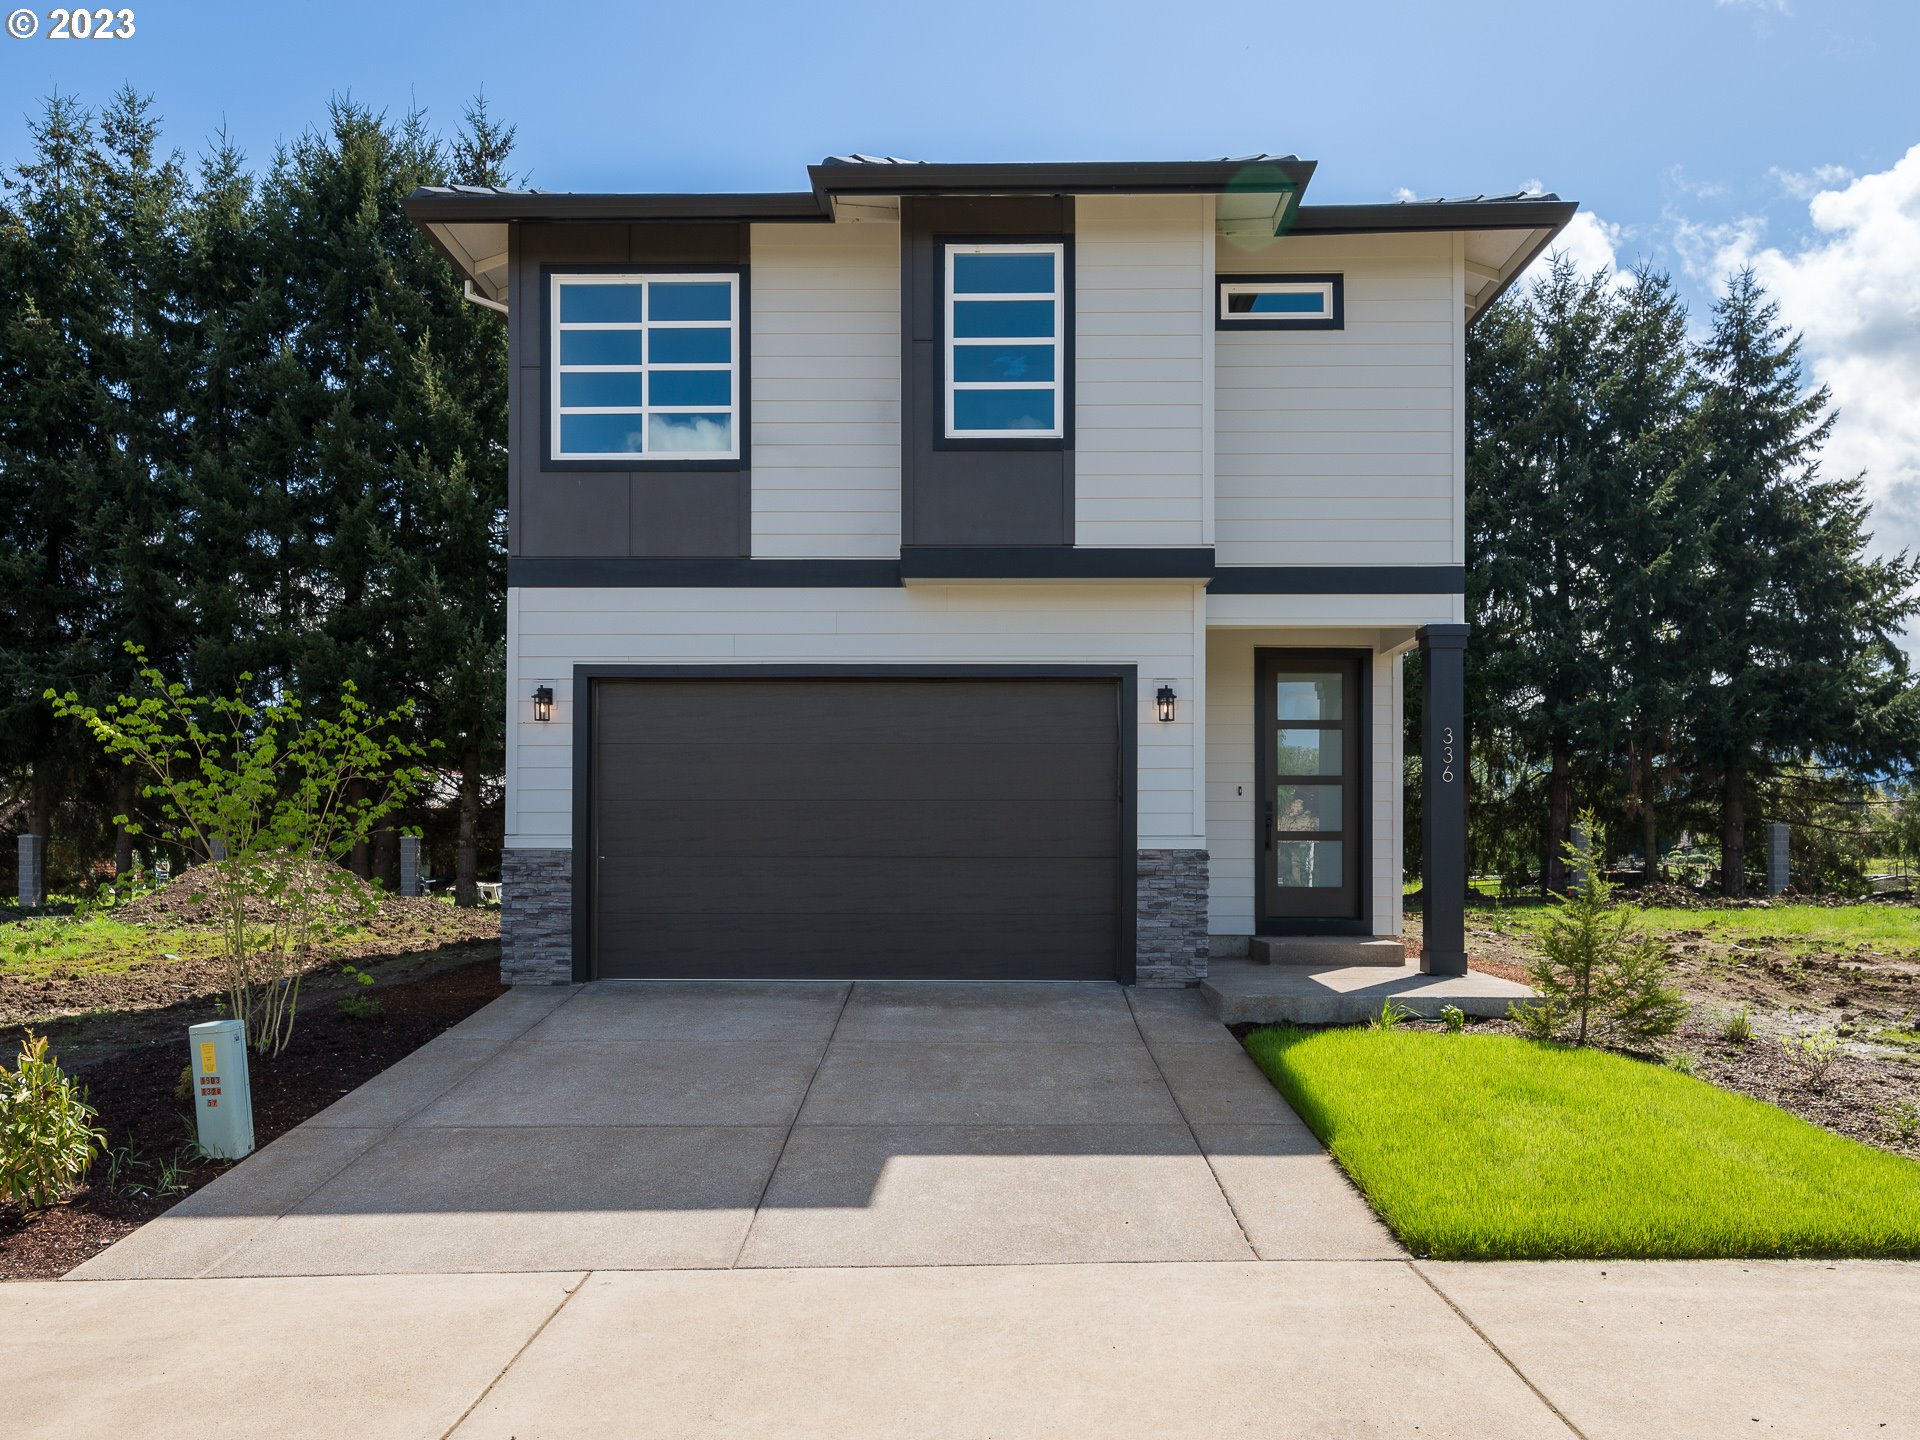 Open Houses:  Thursday May 25th 4-6pm, Sat May 27th 2-4, Sun May 28th 11-1.  Introducing our brand-new contemporary construction, conveniently located just 10 minutes away from Eugene!  Enjoy the best of both worlds with easy access to city while still being able to enjoy the peace and tranquility of a suburban lifestyle. Our community offers a range of 3- and 4-bedroom units, perfect for families of all sizes.  Spacious Great room floorplan on main floor.  The living room has tons of light with large Milgard windows, high ceilings, hardwood floors, and a cozy fireplace. The great room space is open to both the kitchen & dining room.  You'll also find a powder room and generous 2 car garage off the main floor.  The Gourmet kitchen has all stainless appliances, tons of built in cabinets, quartz countertops & tile backsplash.  The generous dining room opens to the back patio & yard for entertainment.  Upstairs you'll find a roomy primary bdrm ensuite with a generous walk-in closet & tons of light. Designer colors & finishes throughout the entire home.  The front yard is landscaped with lawn, hardscape, and sprinklers.  Amenities include tennis courts, basketball, parks, extensive neighborhood walking paths & a renowned golf course which is a short walk away. Call or visit Weekend Open Houses. Builder offering a $10,000 interest rate buy down or closing credit for any home that closes prior to July 15th, 2023.